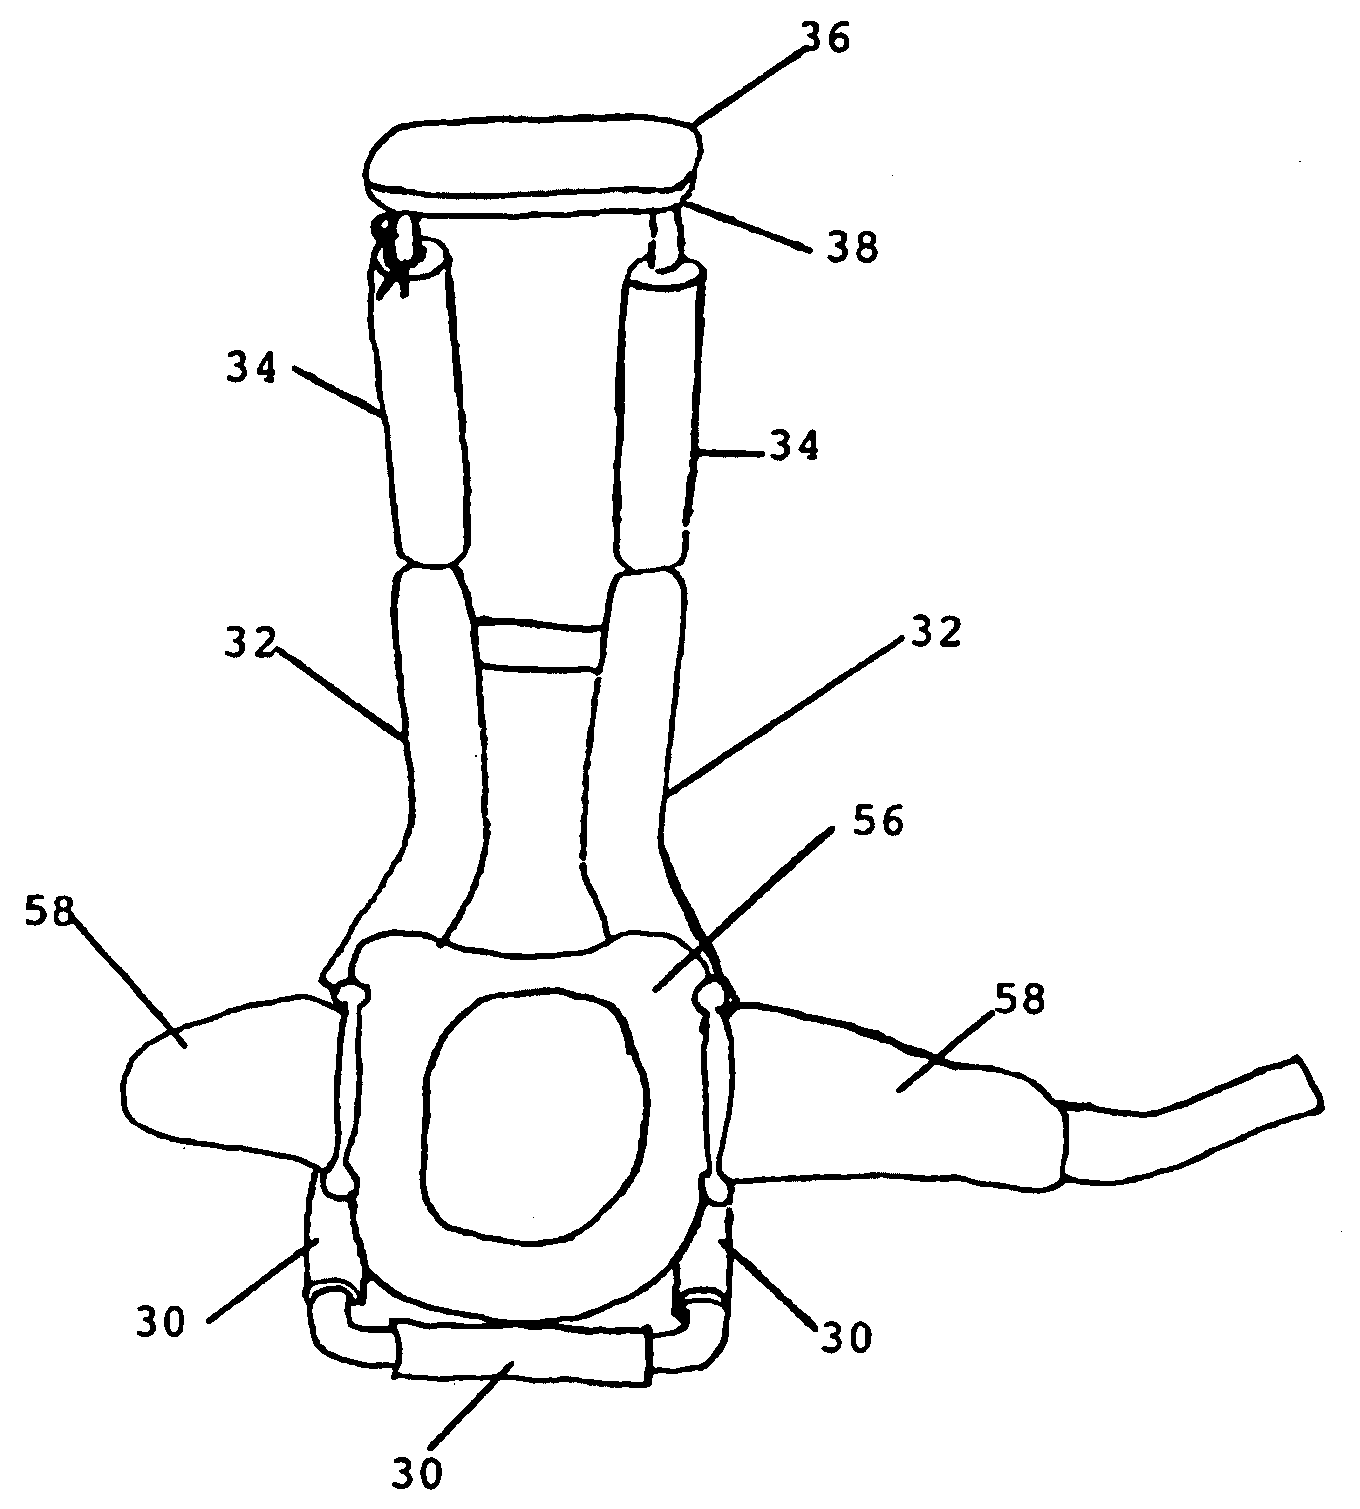 Lower body support device